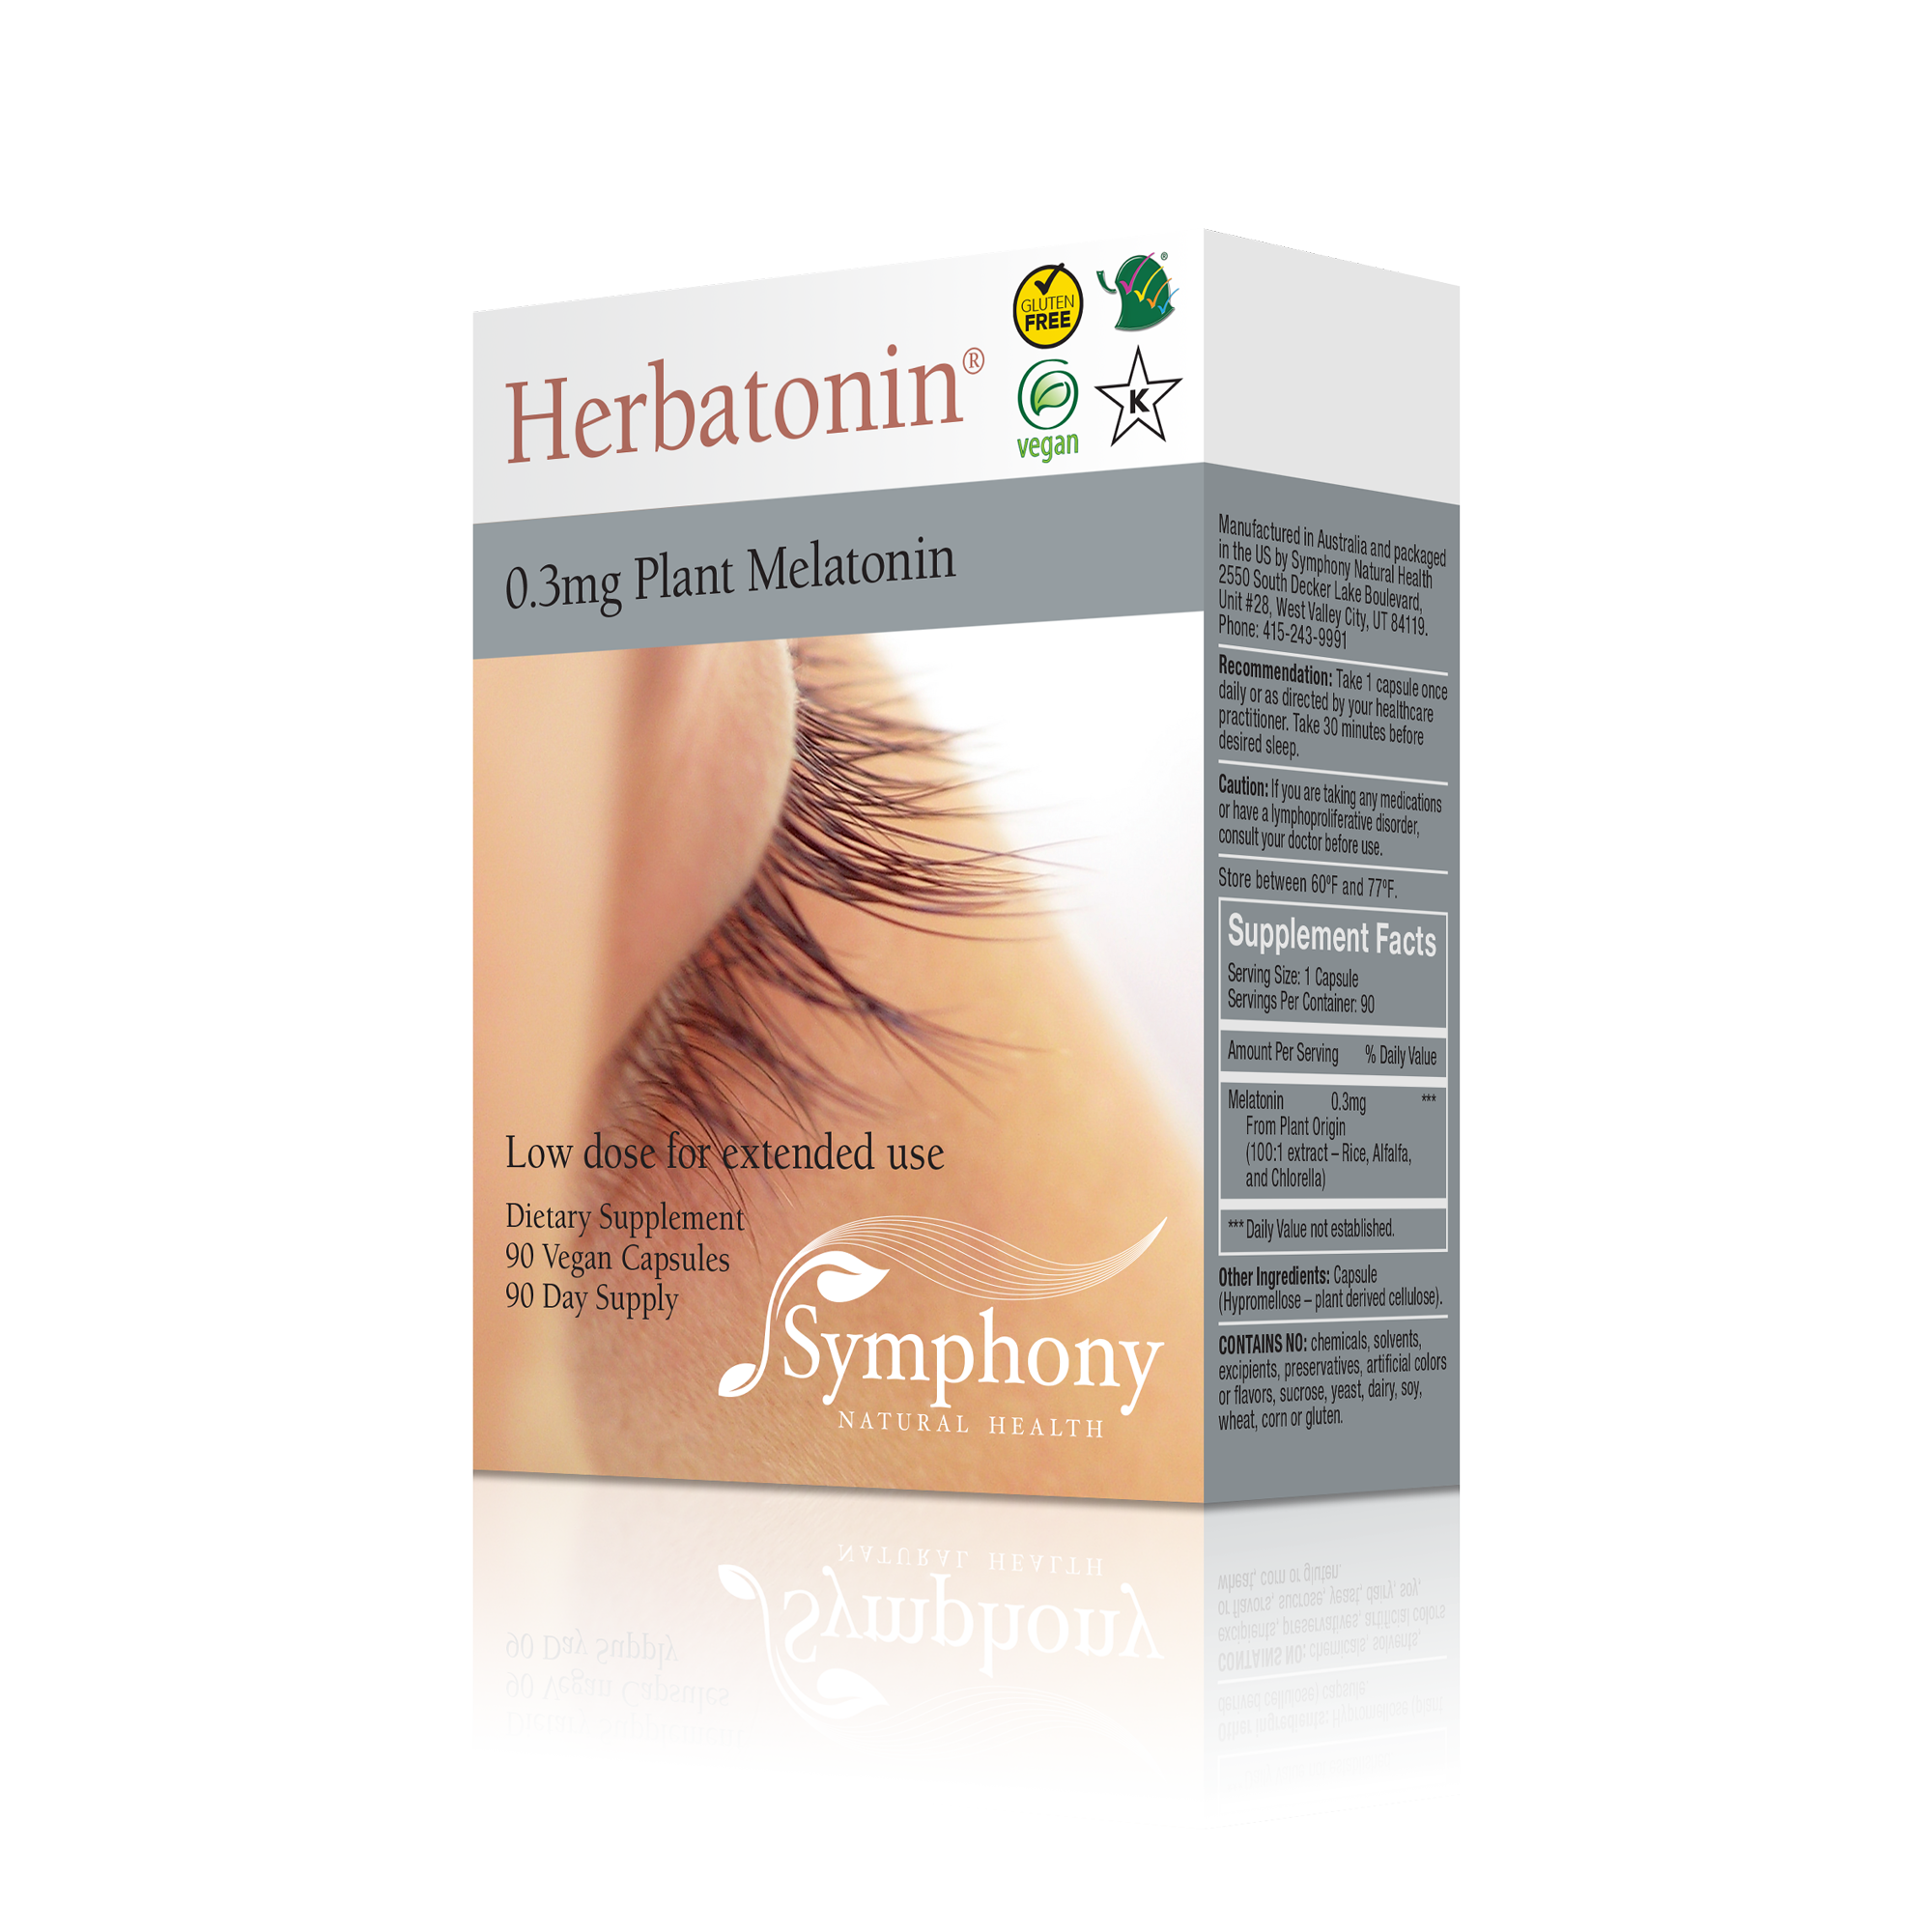 Herbatonin 0.3mg left-facing front and side of two product boxes on black background Herbatonin brown logo on white background, low dose for extended use, white female face cropped showing closed eyelid, gluten free, vegan and Kosher logos, symphony logo, recommendation, caution, supplement facts, manufactured in Australia